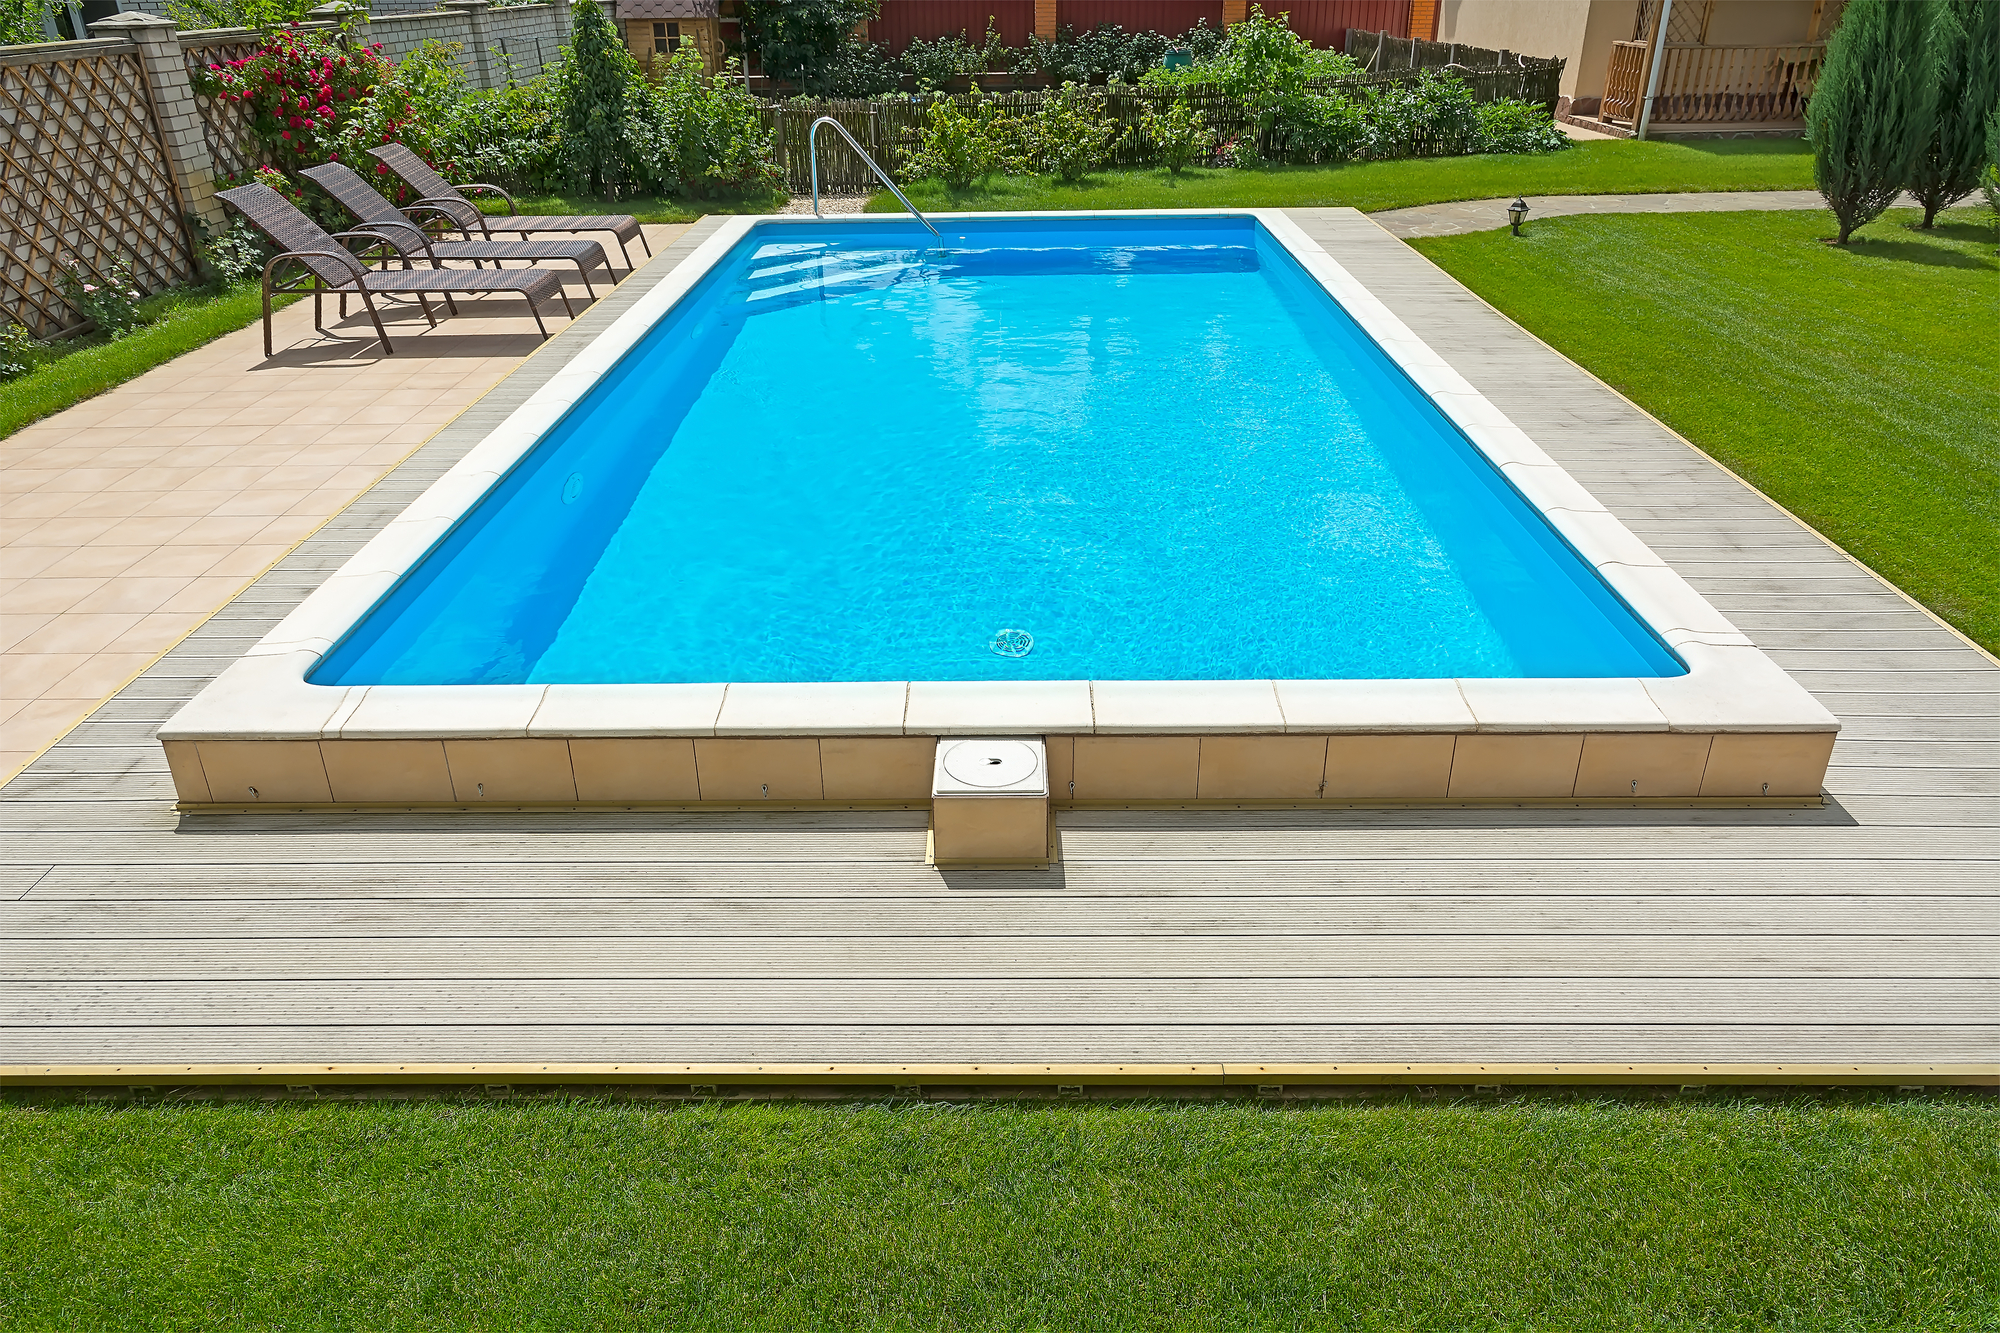 Ensure your swimming oasis stays perfect with Frisco Pool Leak Detection services